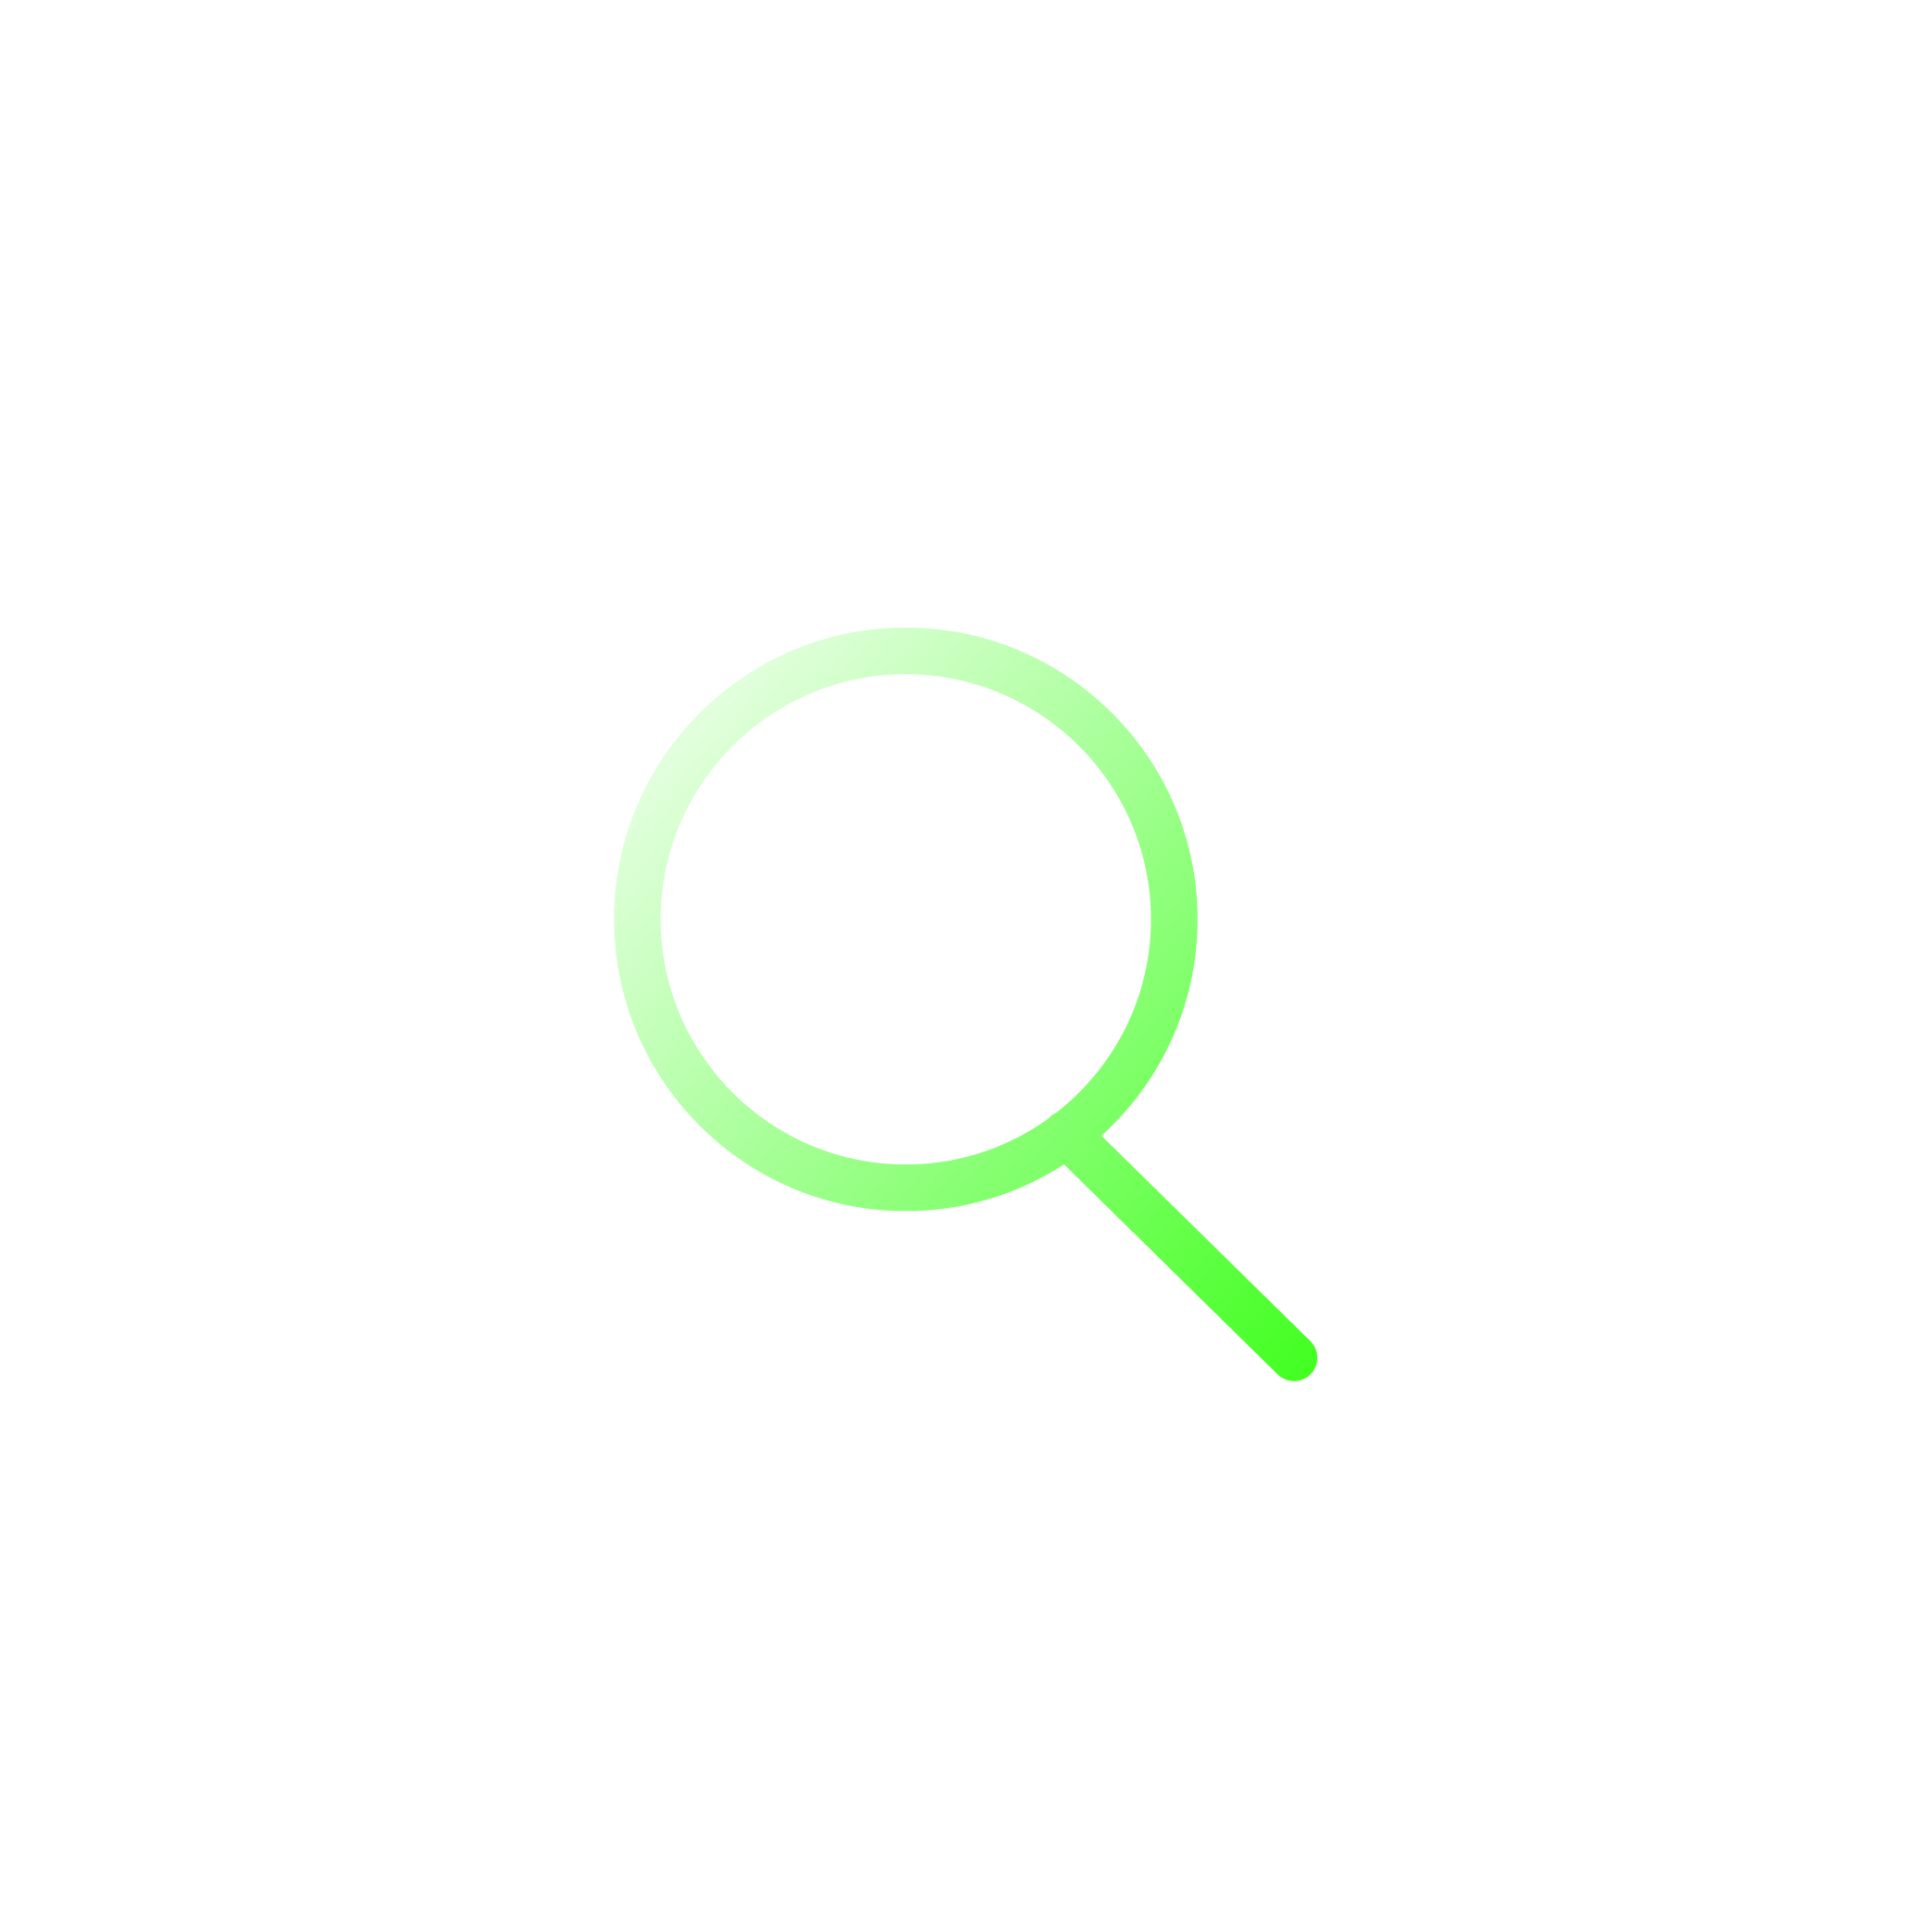 magnifying glass vector icon